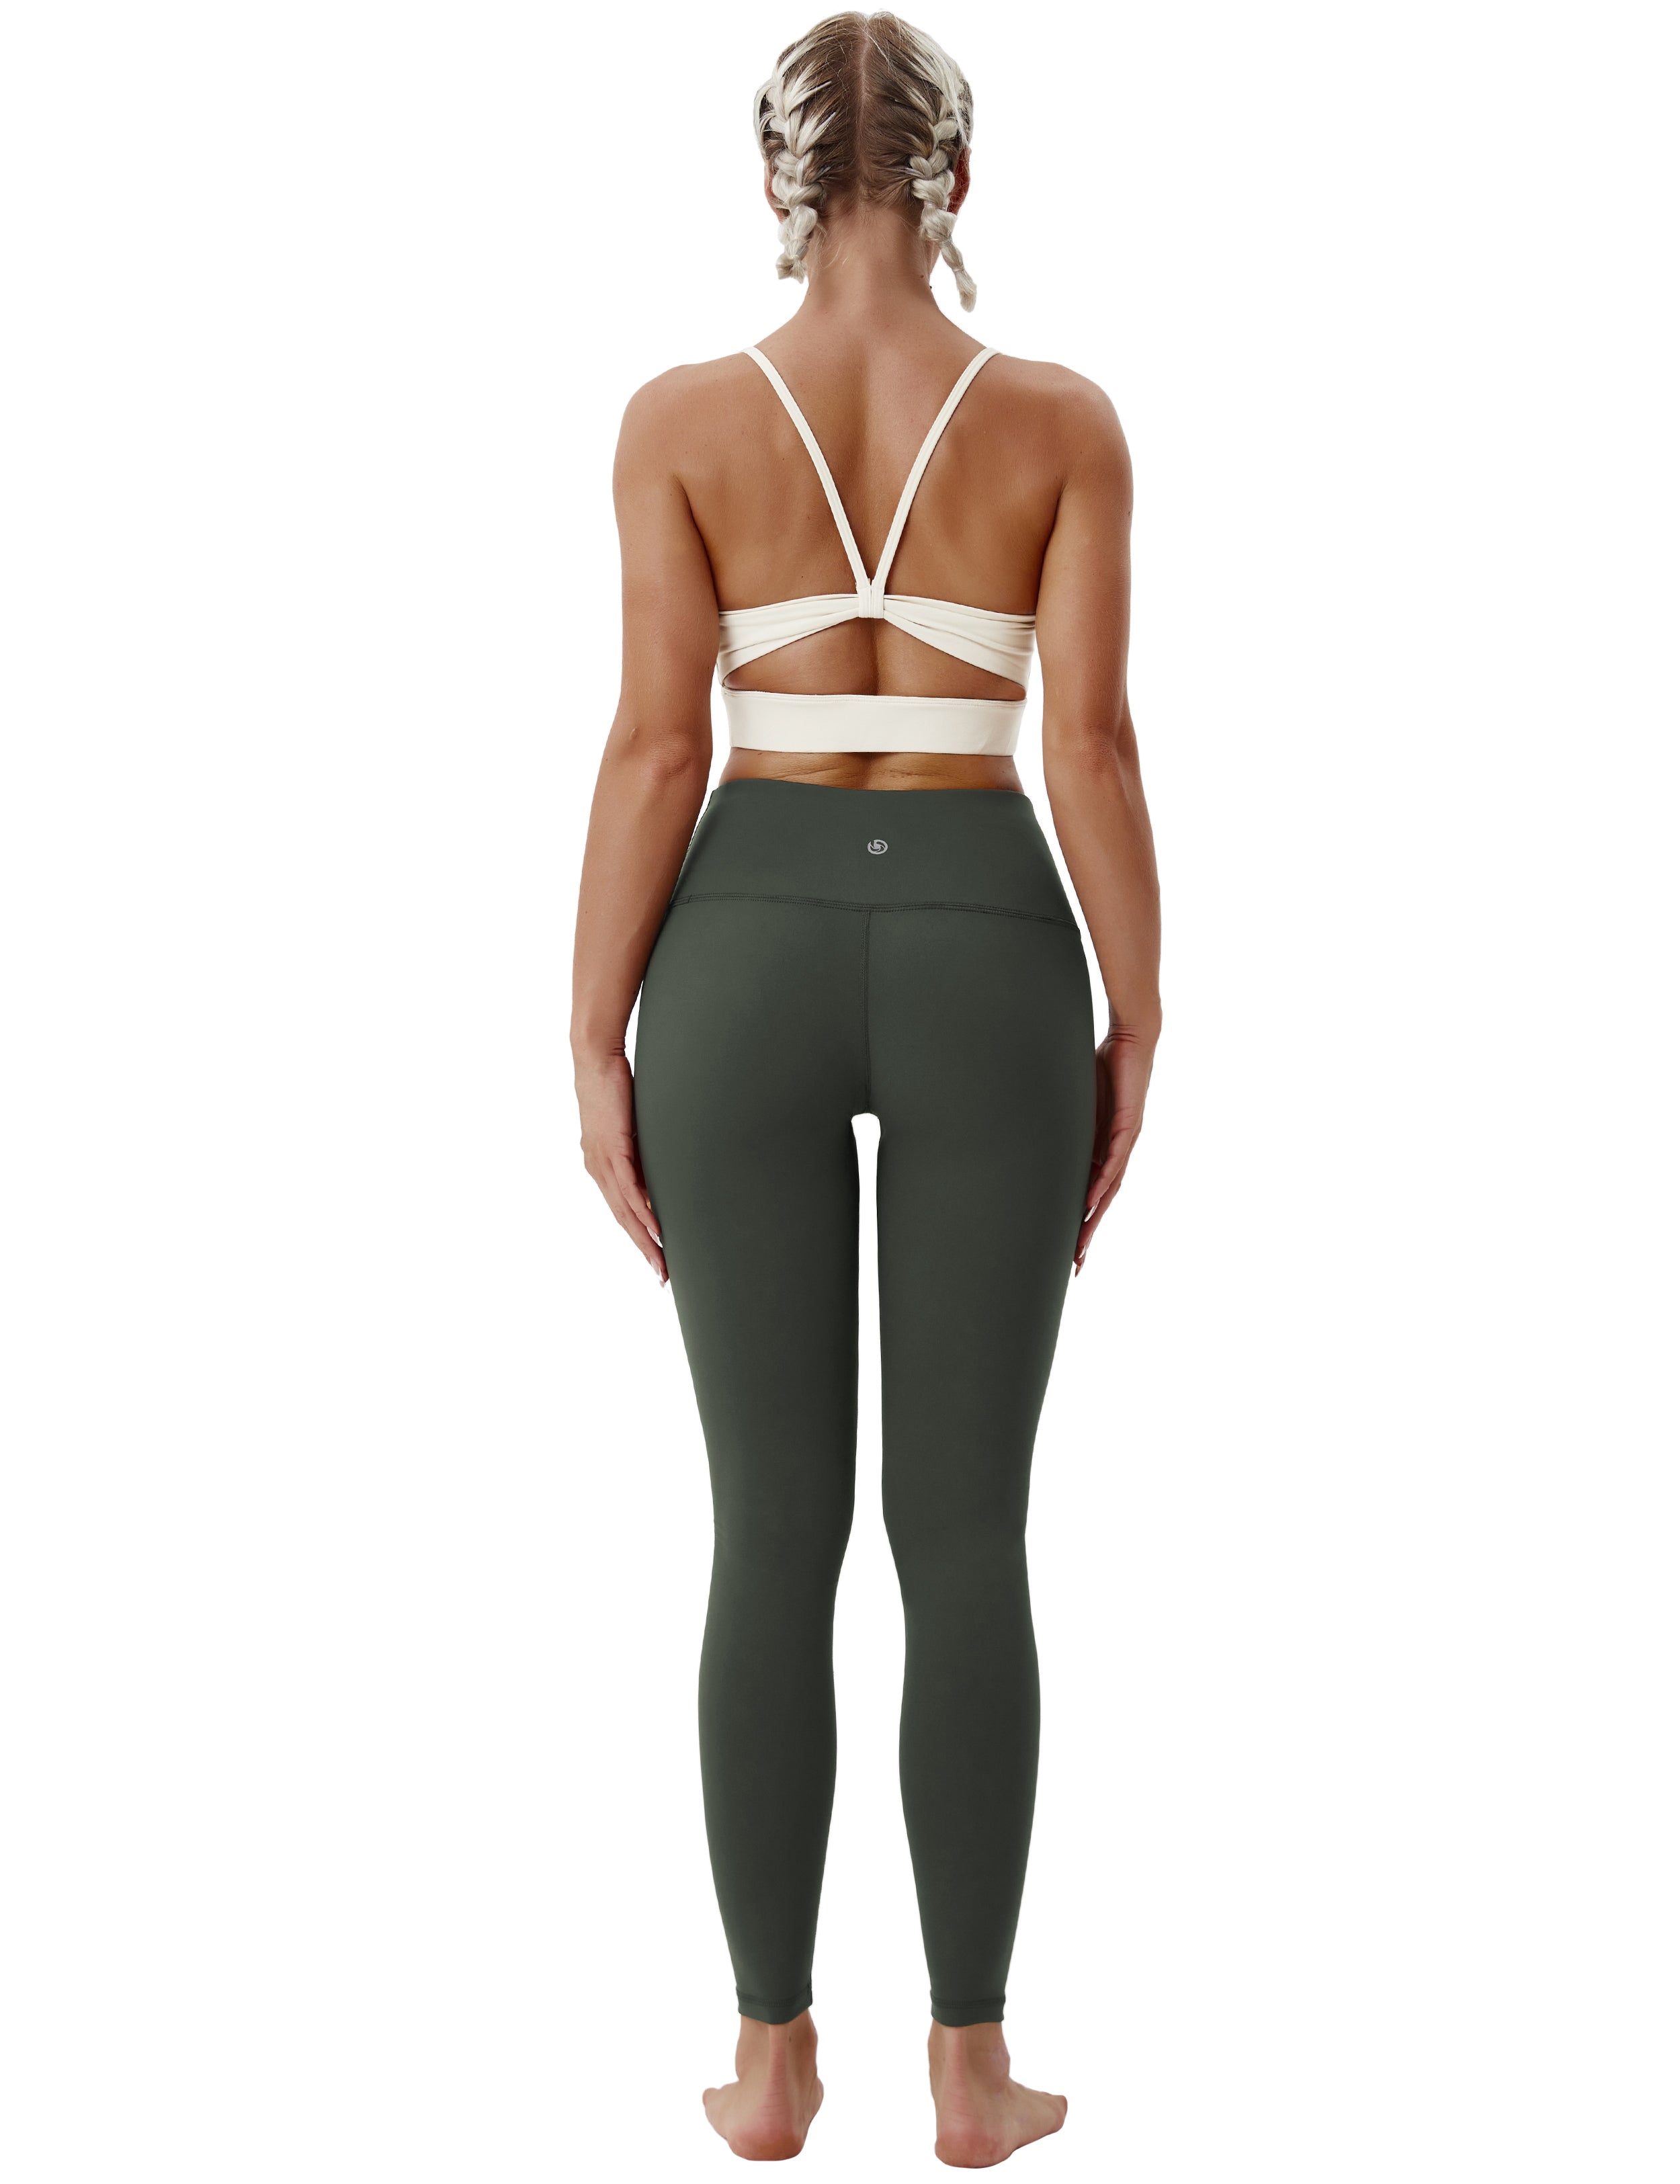 High Waist yogastudio Pants olivegray 75%Nylon/25%Spandex Fabric doesn't attract lint easily 4-way stretch No see-through Moisture-wicking Tummy control Inner pocket Four lengths